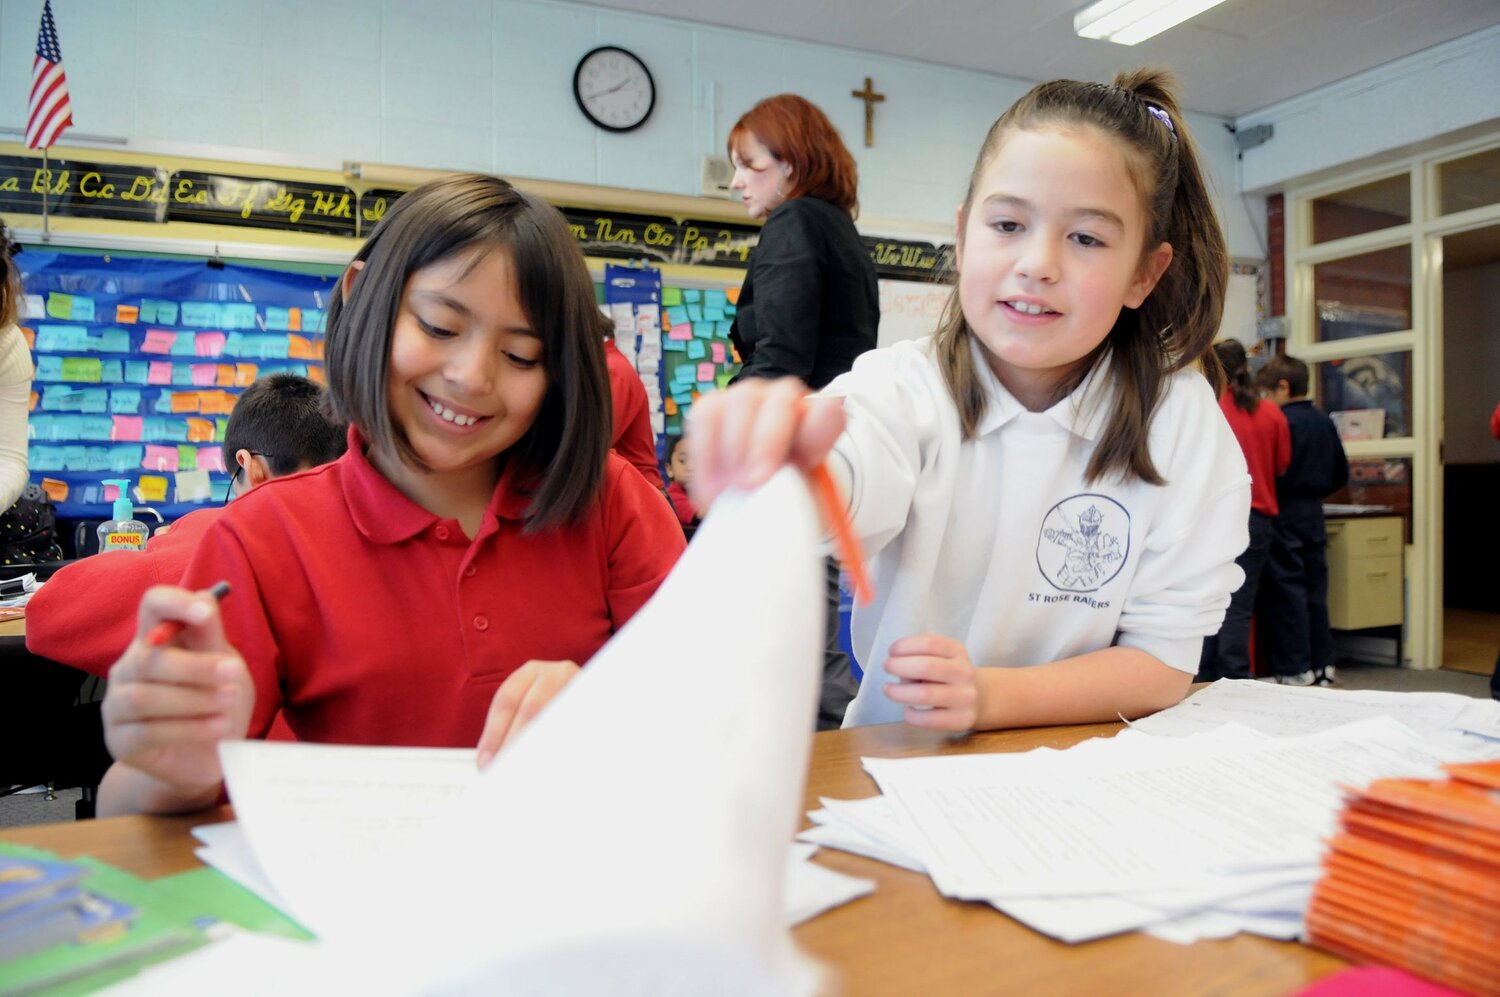 Students Evangelina Romero and Samantha Cabral at St. Rose of Lima School in Denver, work on a project in this file photo dated Dec. 12, 2009. (OSV News photo/James Baca, Denver Catholic Register)